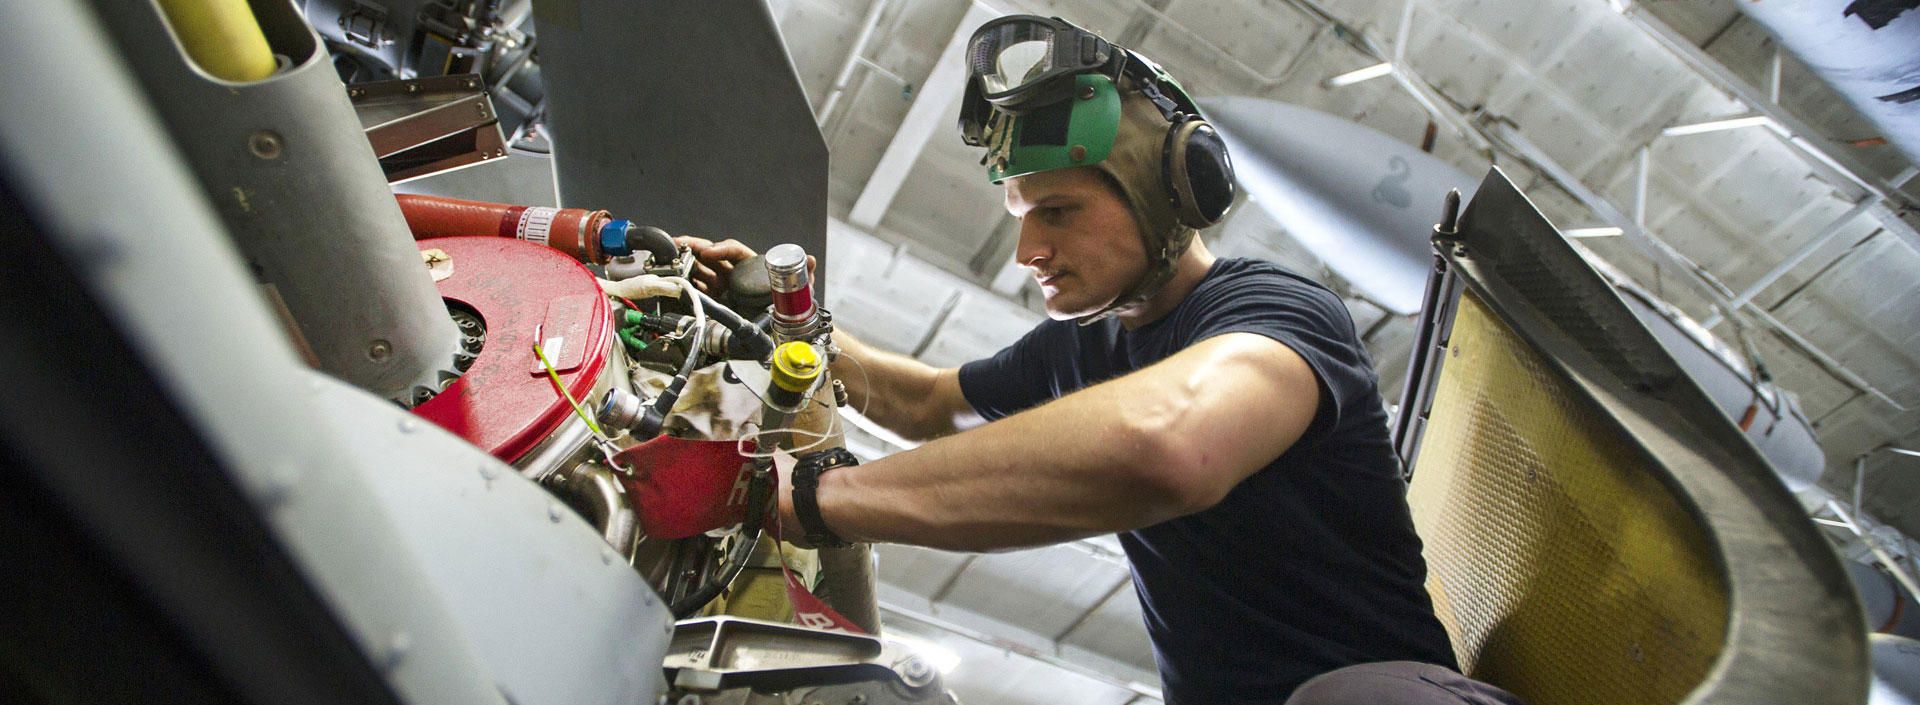 Careers for Navy Machinist's Mates through Orion Talent